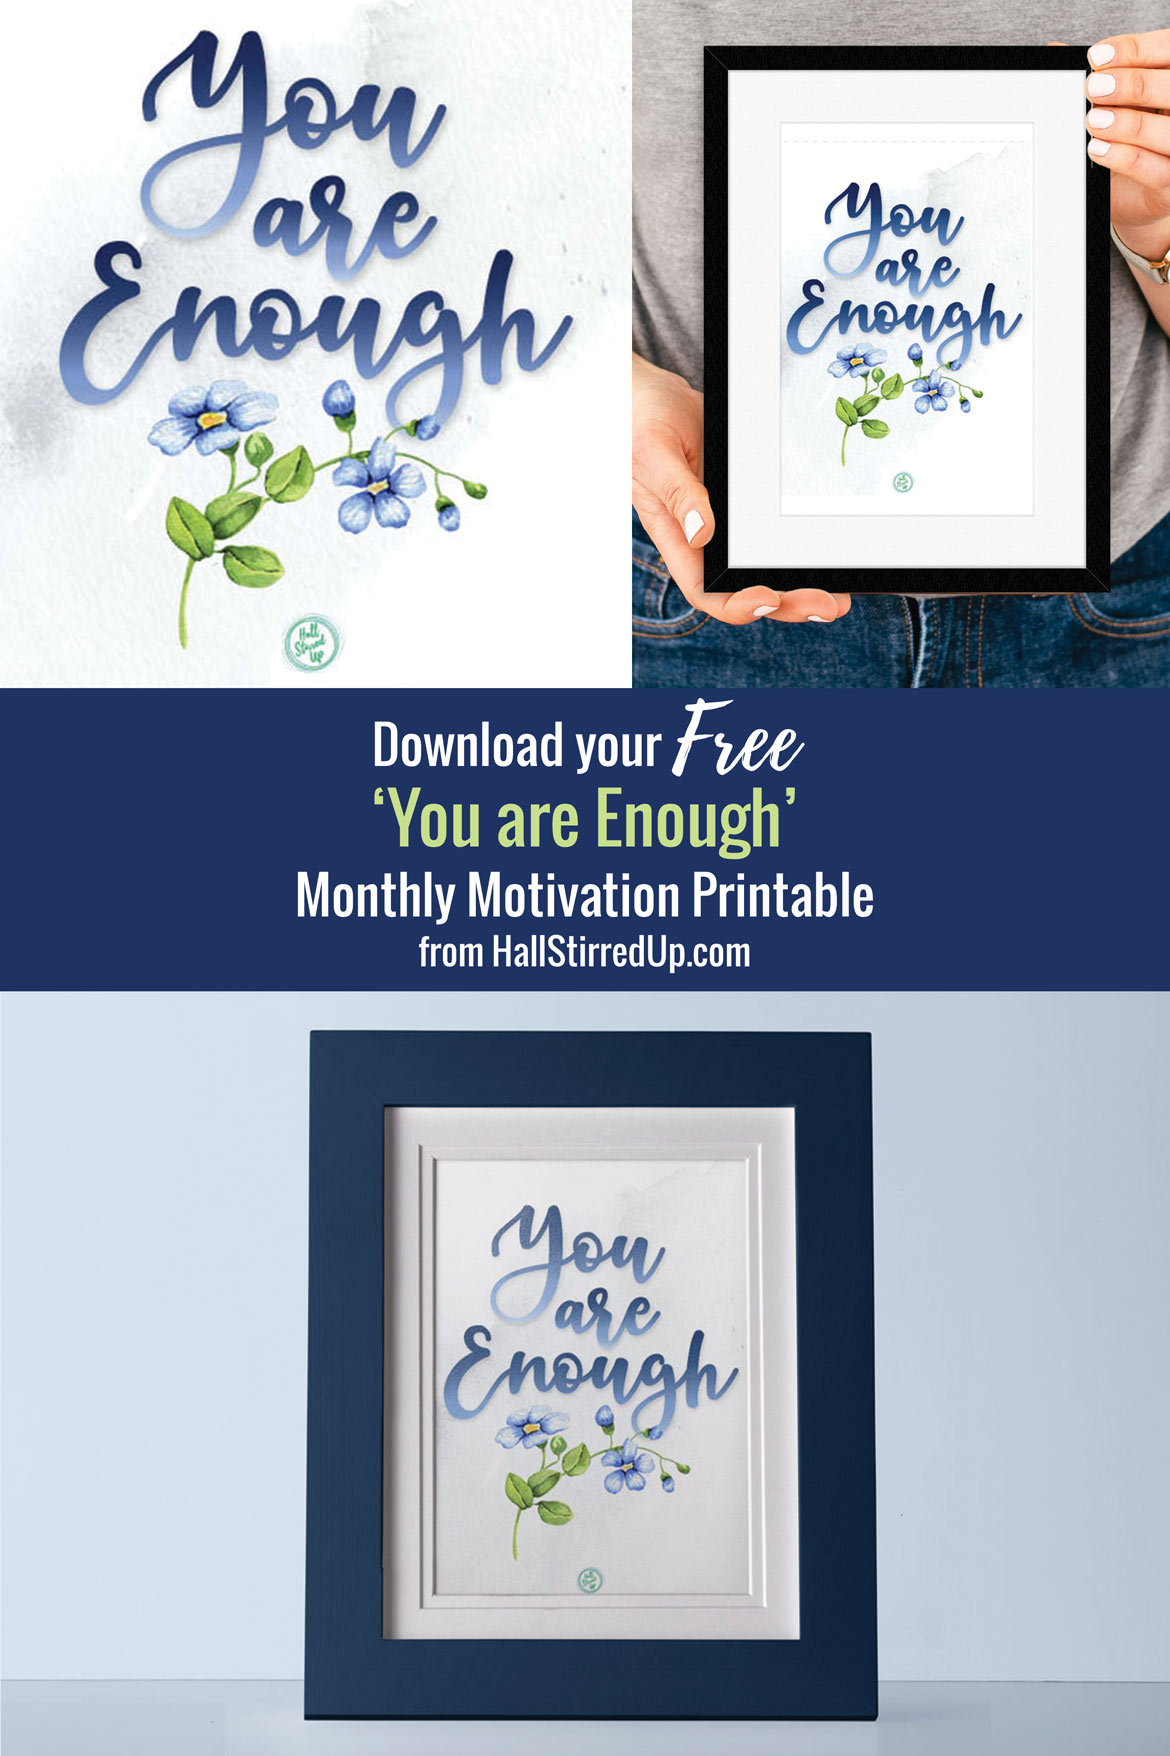 Kick your critic to the curb! Includes a free 'You are Enough' printable